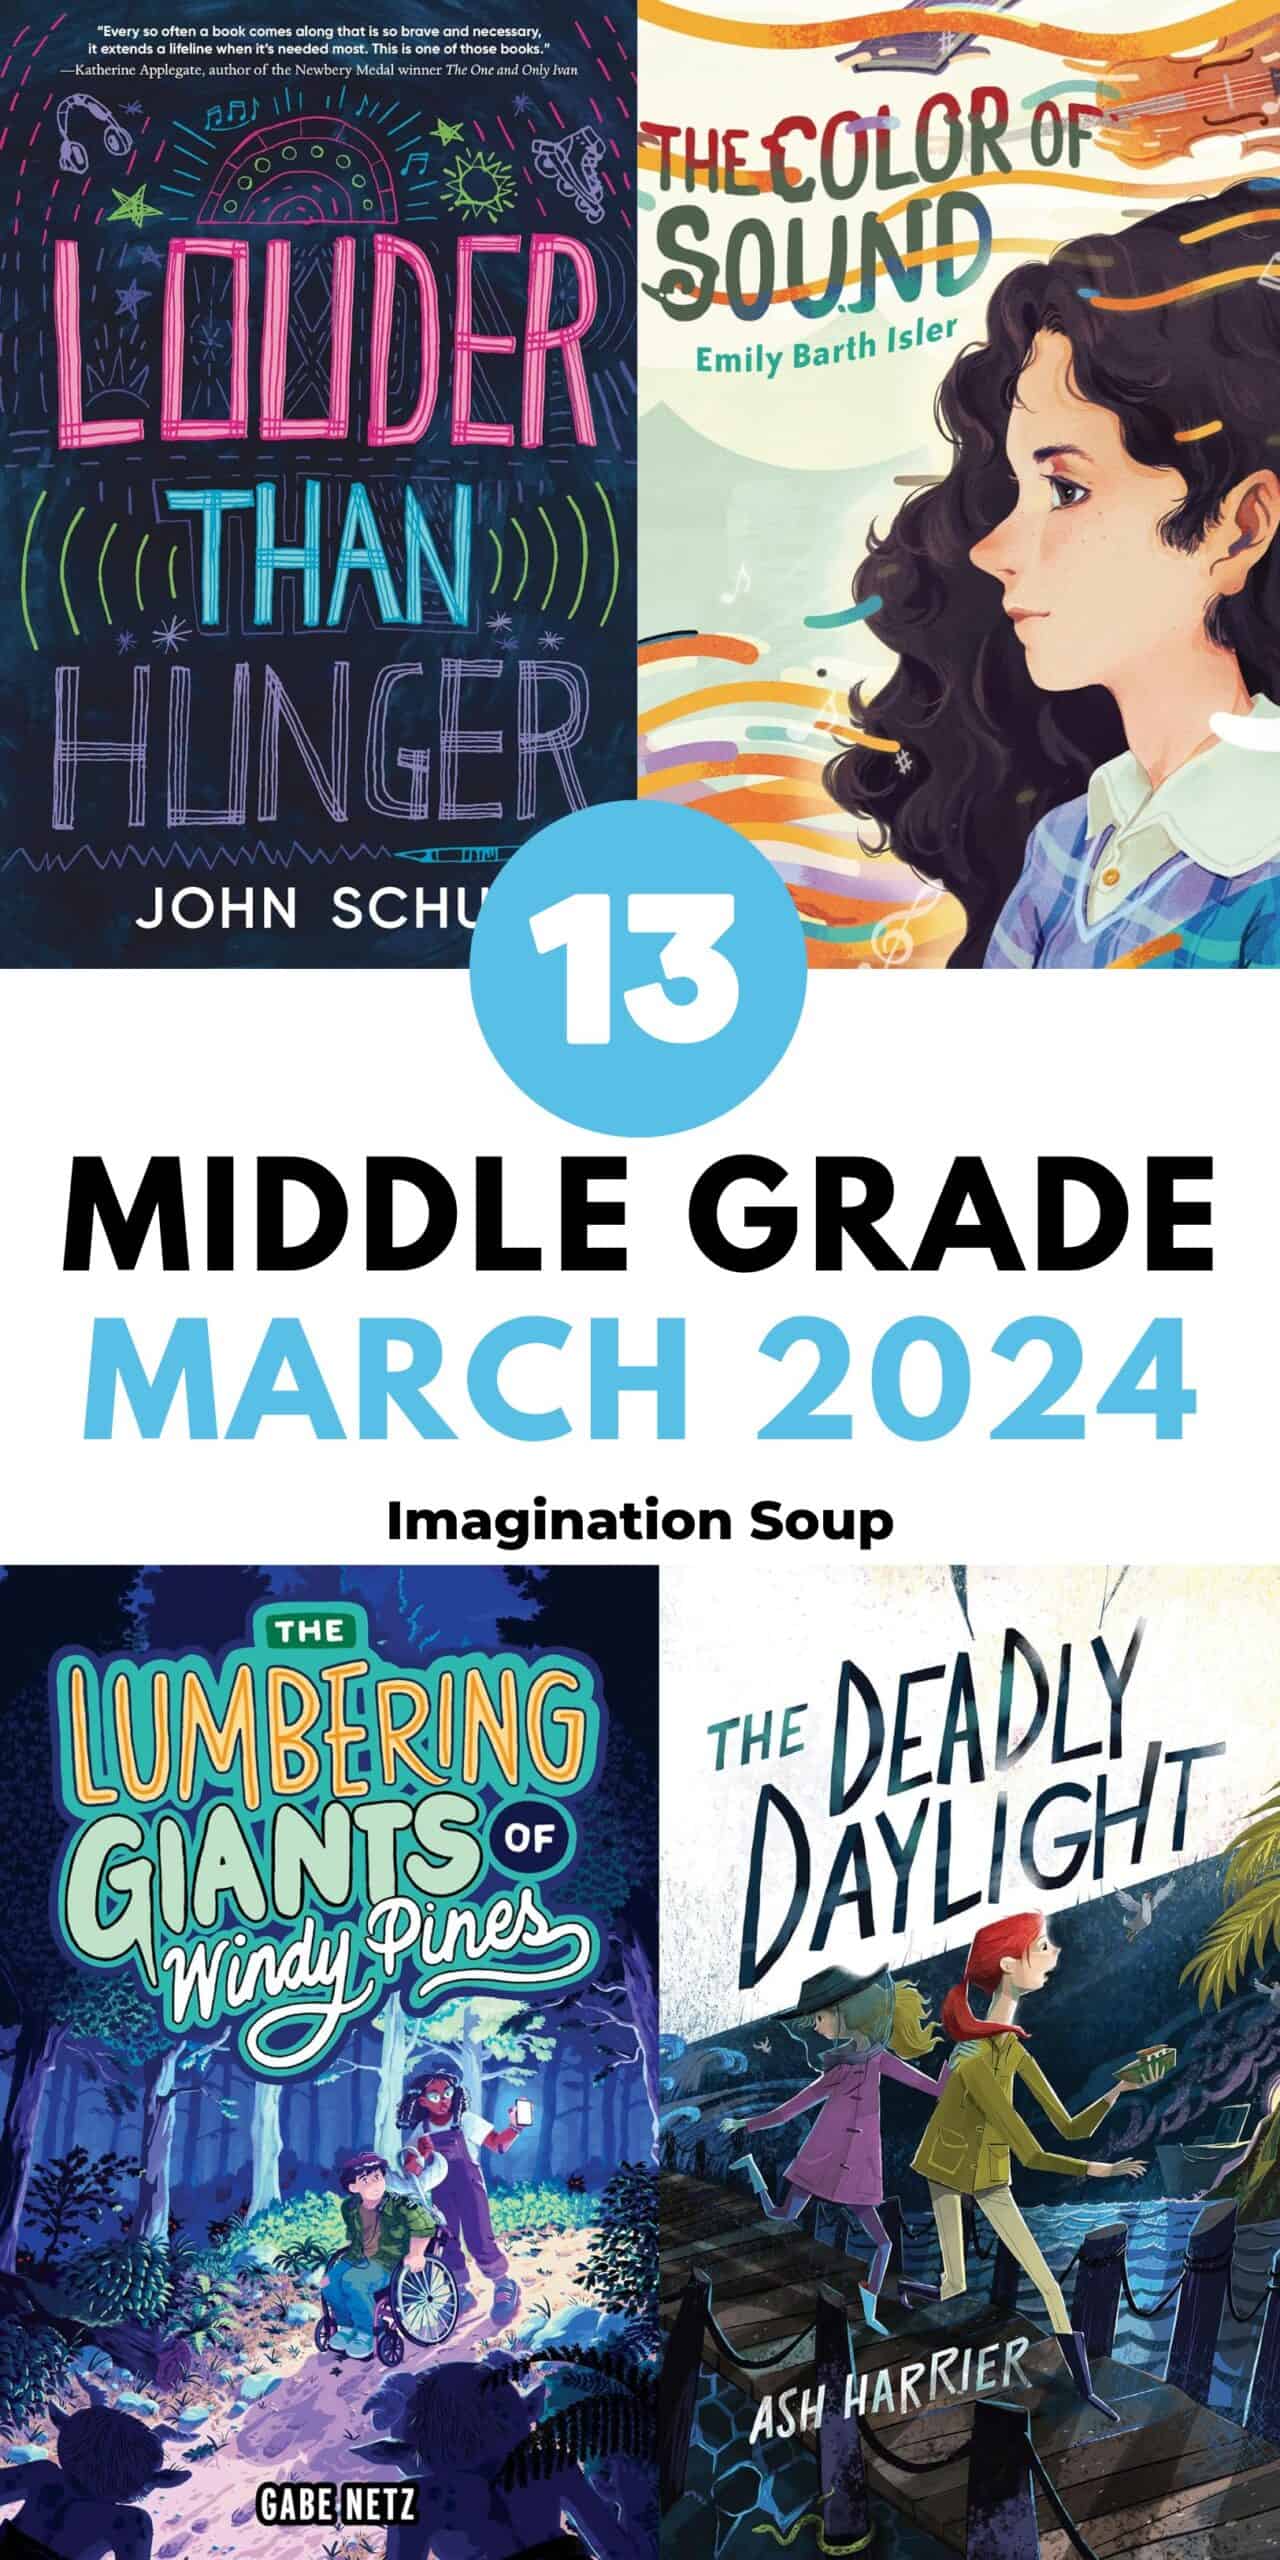 new middle grade books for March 2024
